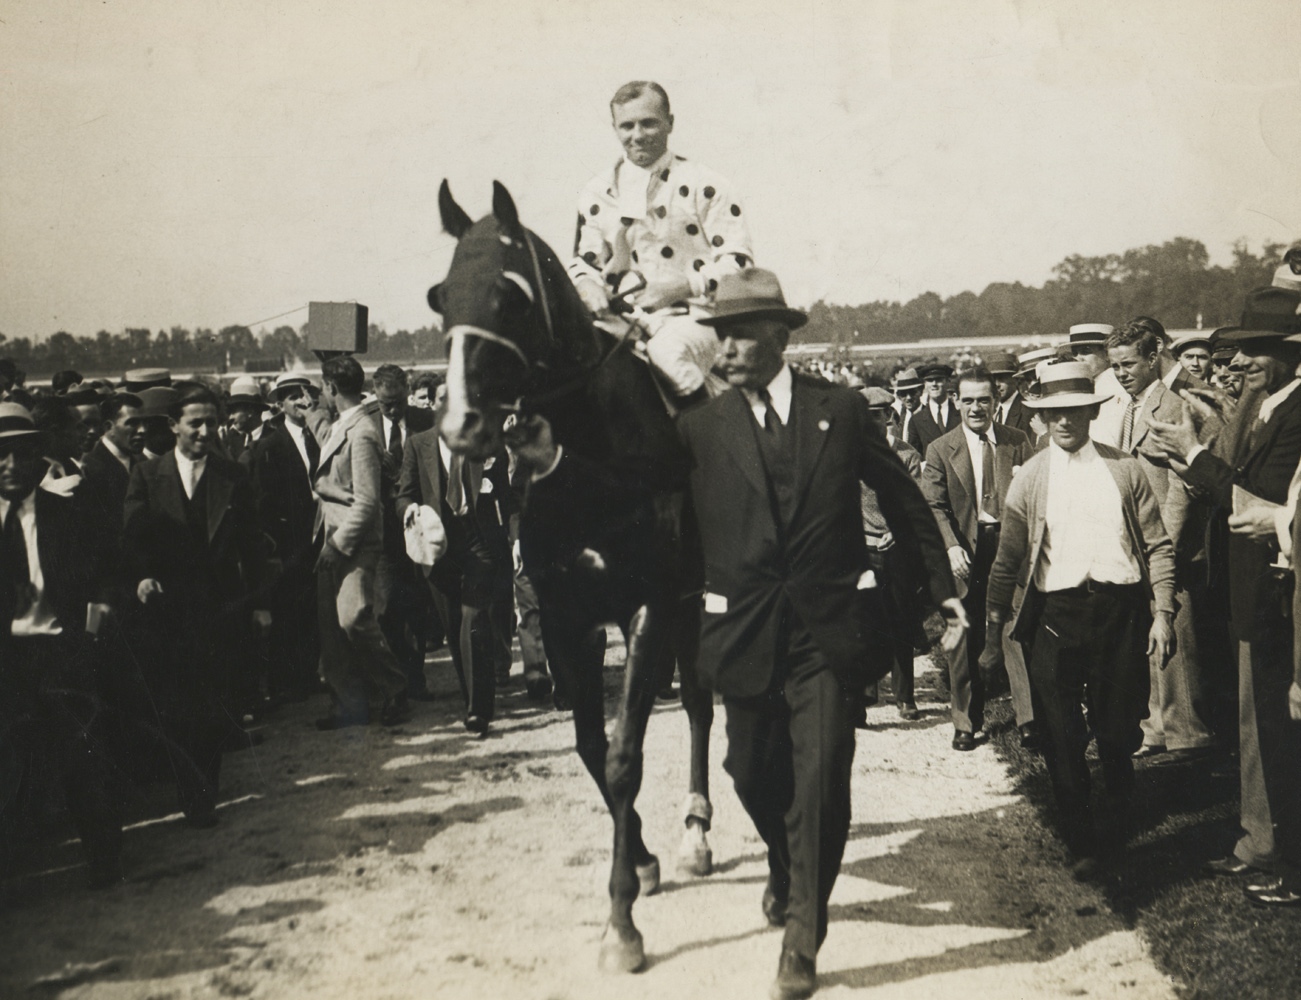 Owner William Woodward, Jr. leading in Gallant Fox and Earl Sande after winning the 1930 Lawrence Realization at Belmont Park (Pictorial Press Photos/Museum Collection)